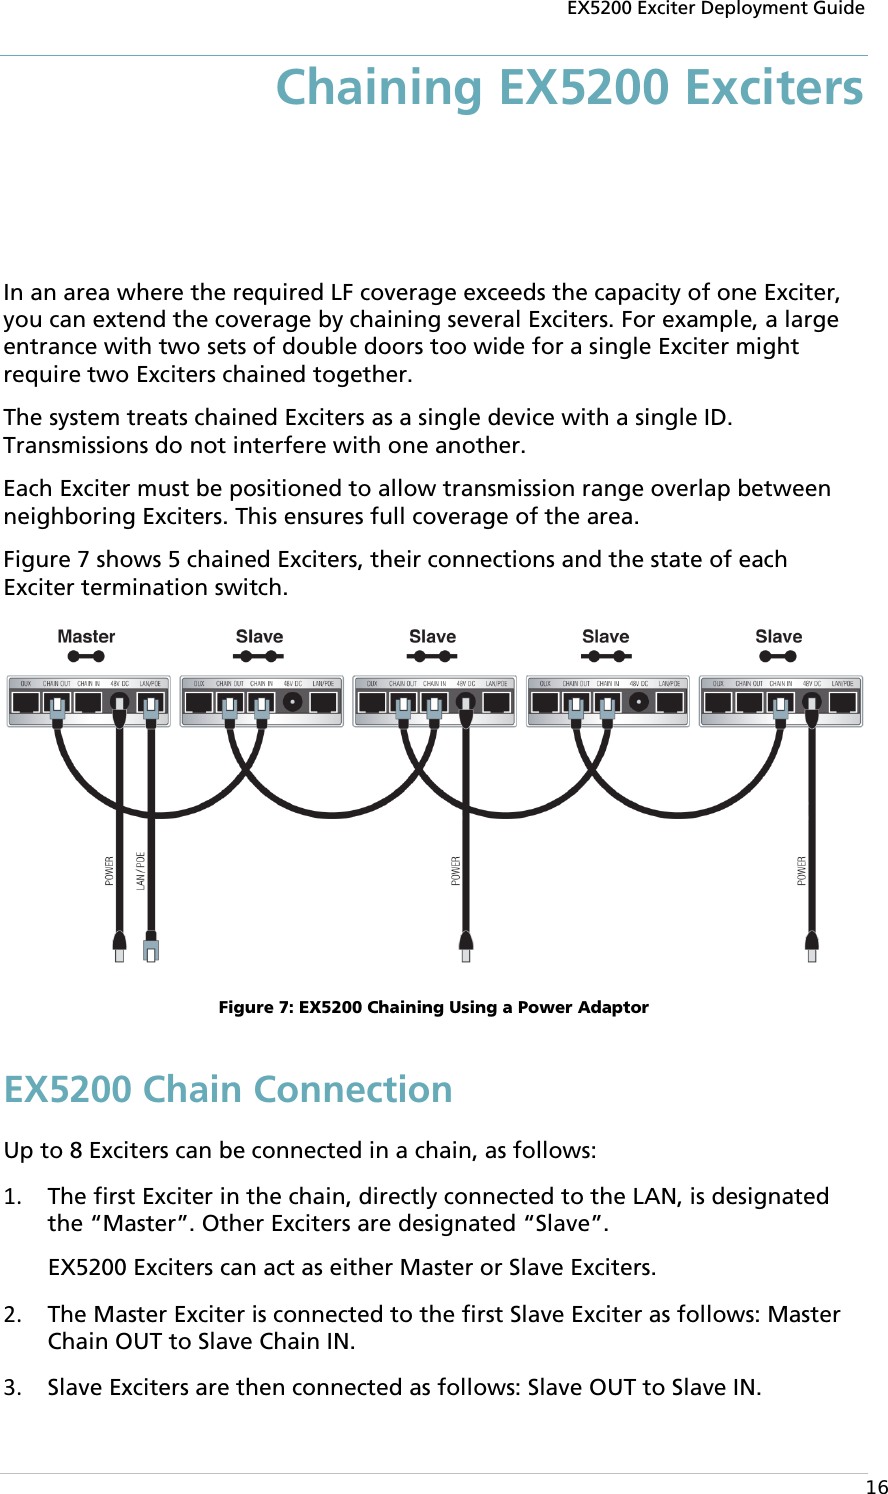 EX5200 Exciter Deployment Guide  16 Chaining EX5200 Exciters In an area where the required LF coverage exceeds the capacity of one Exciter, you can extend the coverage by chaining several Exciters. For example, a large entrance with two sets of double doors too wide for a single Exciter might require two Exciters chained together.  The system treats chained Exciters as a single device with a single ID. Transmissions do not interfere with one another.  Each Exciter must be positioned to allow transmission range overlap between neighboring Exciters. This ensures full coverage of the area. Figure 7 shows 5 chained Exciters, their connections and the state of each Exciter termination switch.  Figure 7: EX5200 Chaining Using a Power Adaptor EX5200 Chain Connection Up to 8 Exciters can be connected in a chain, as follows: 1. The first Exciter in the chain, directly connected to the LAN, is designated the “Master”. Other Exciters are designated “Slave”.  EX5200 Exciters can act as either Master or Slave Exciters. 2. The Master Exciter is connected to the first Slave Exciter as follows: Master Chain OUT to Slave Chain IN. 3. Slave Exciters are then connected as follows: Slave OUT to Slave IN. 